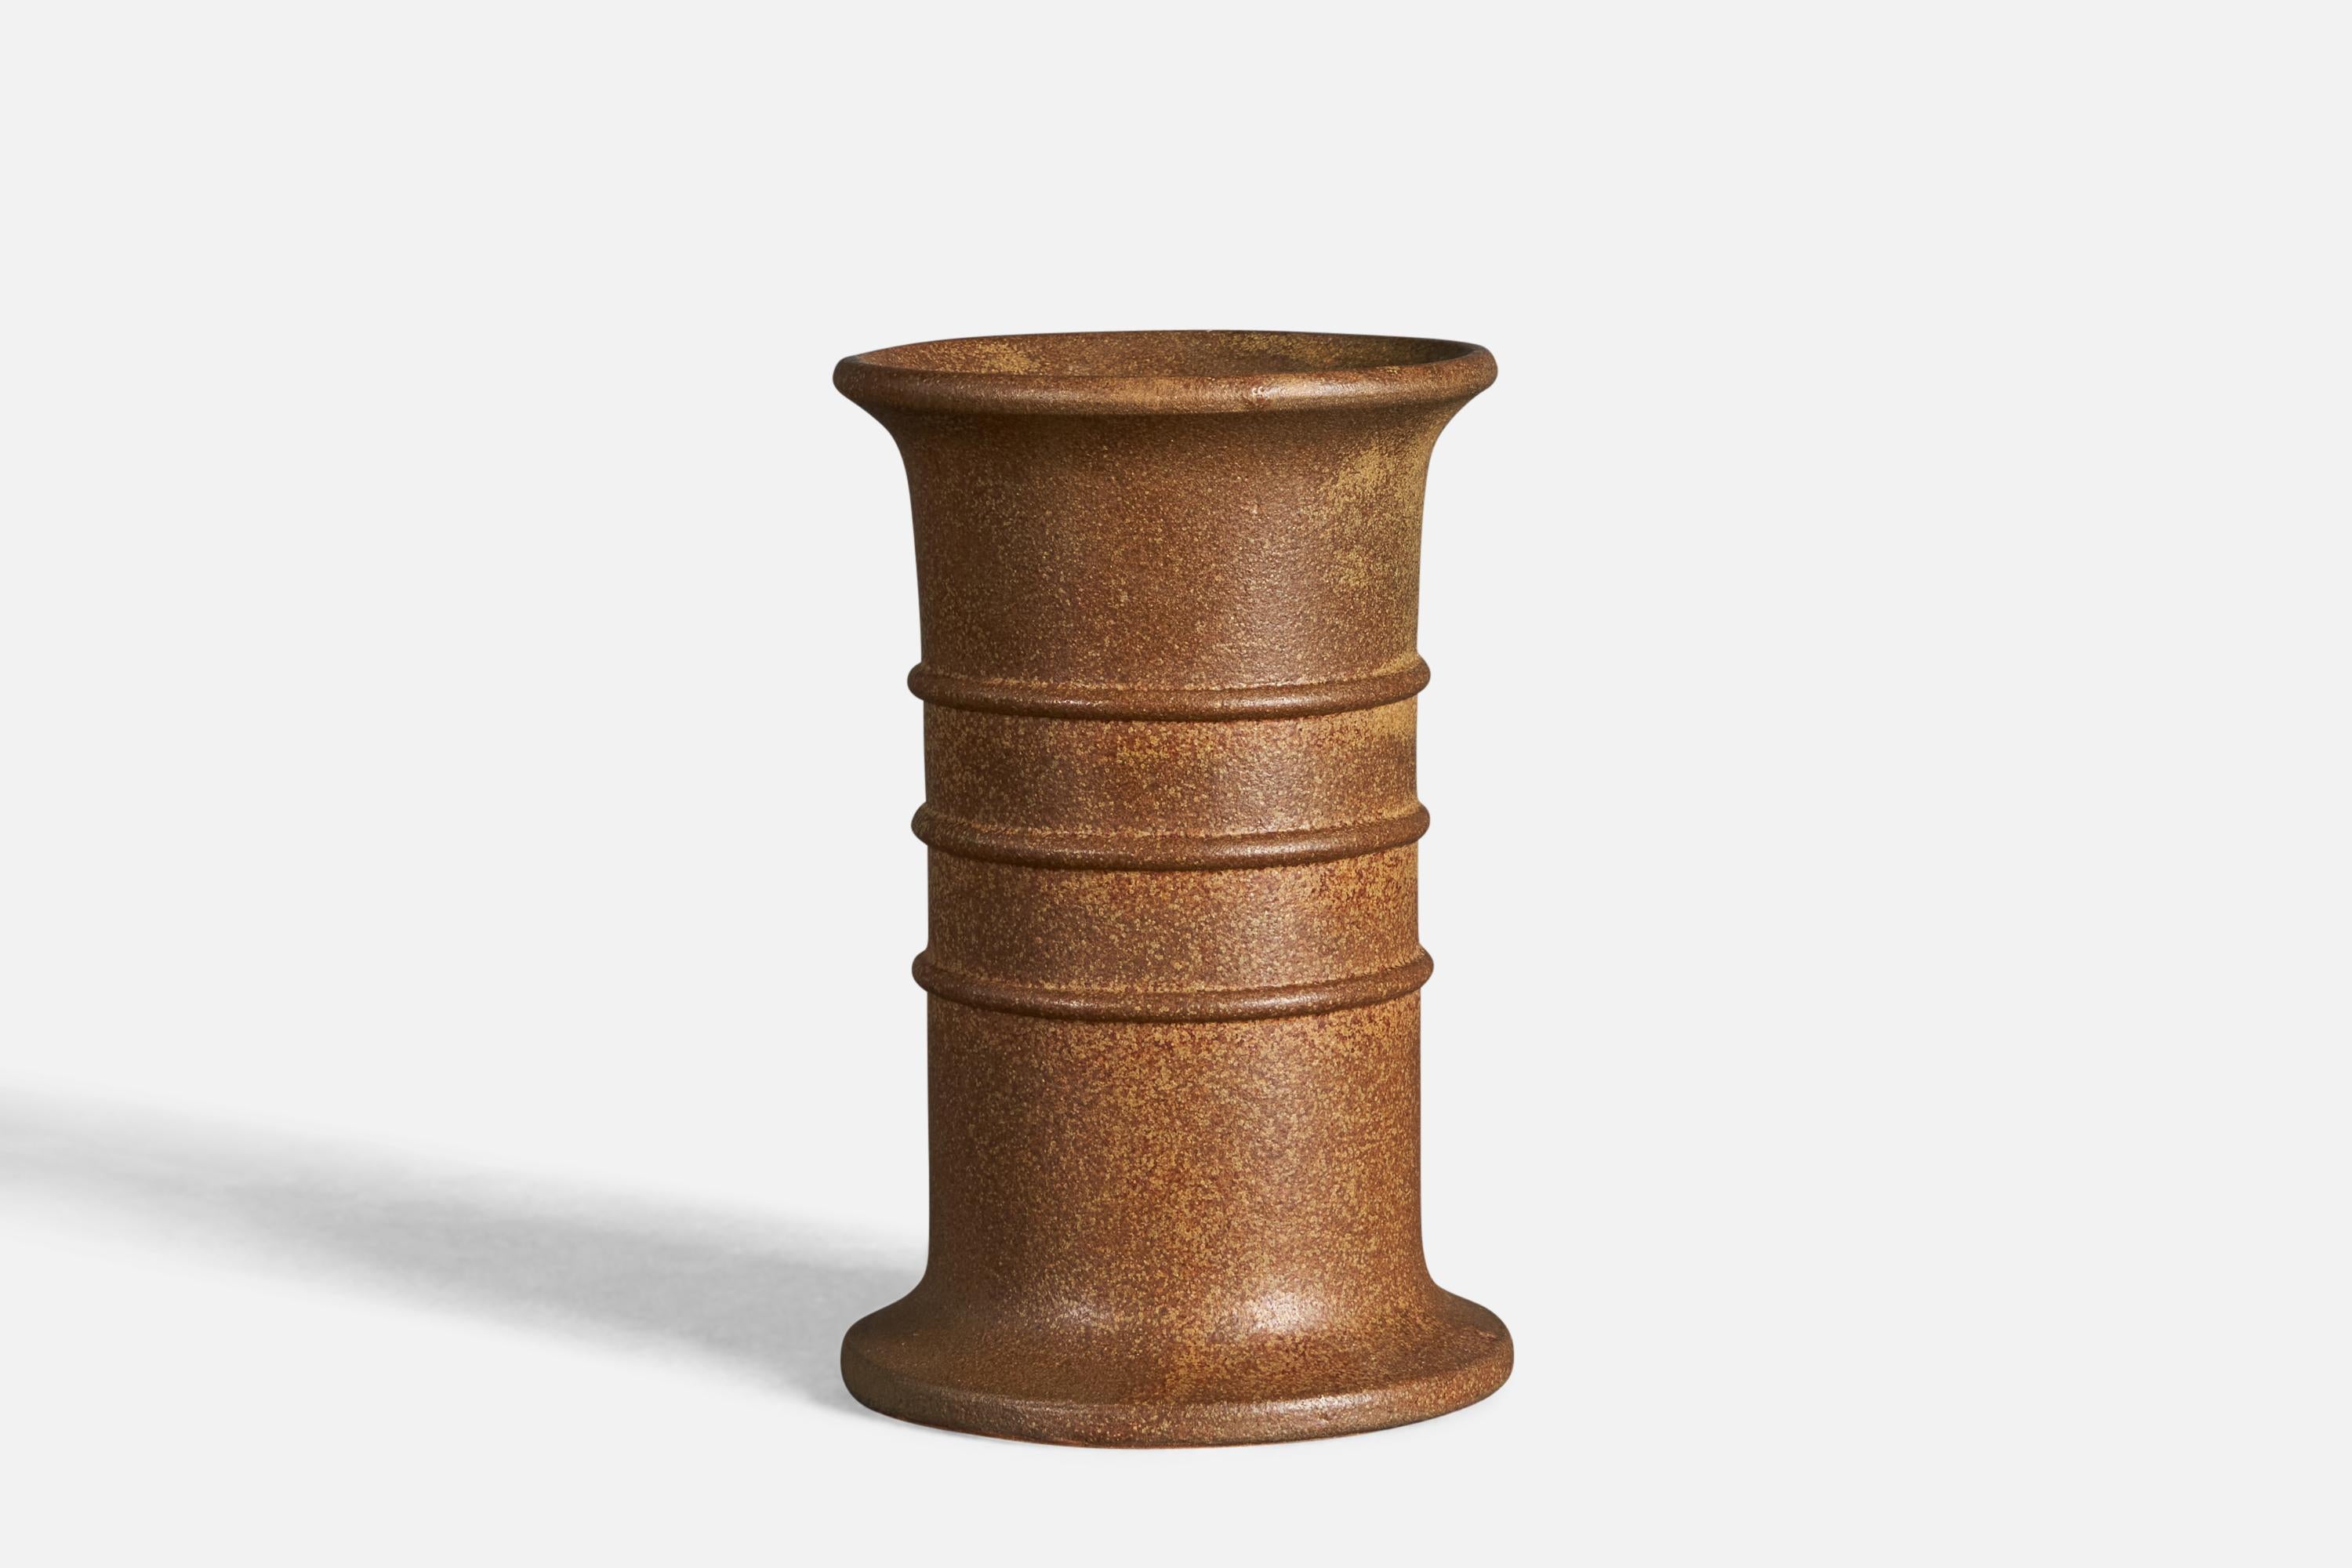 A brown-glazed stoneware vase, designed and produced by Arne Bang, Denmark, c. 1930s.